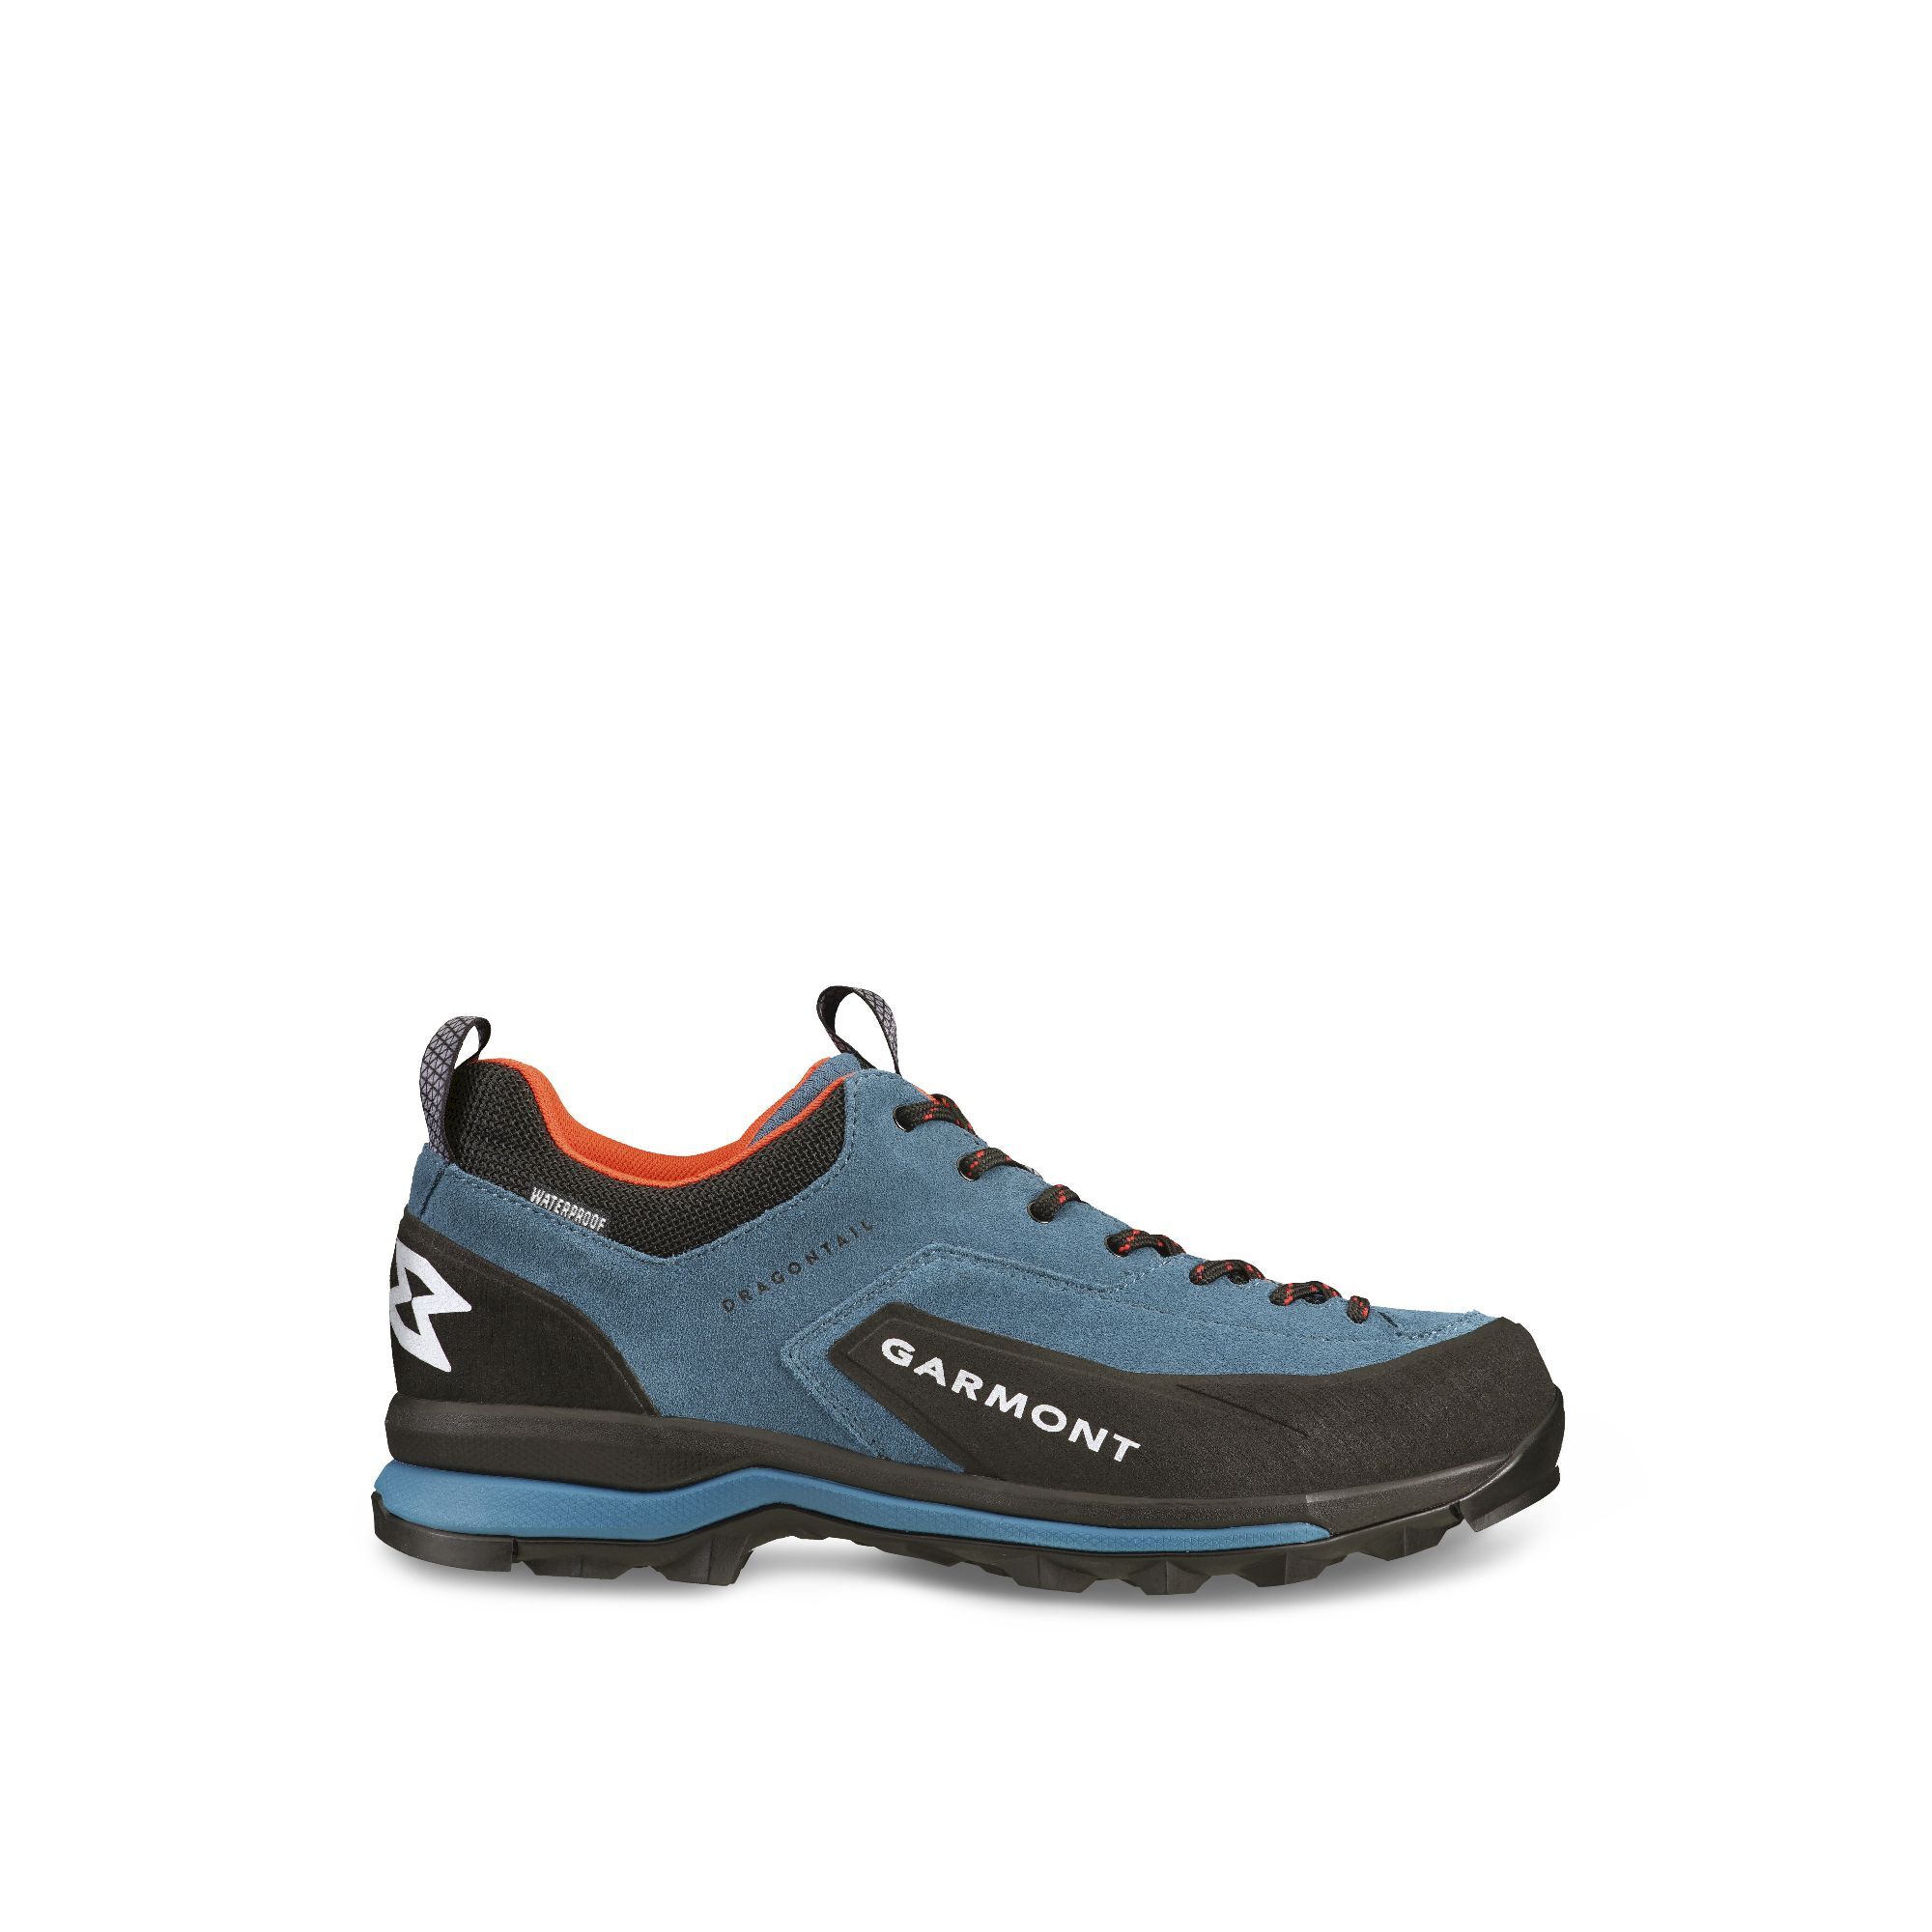 Garmont Dragontail WP - Approach shoes - Men's | Hardloop